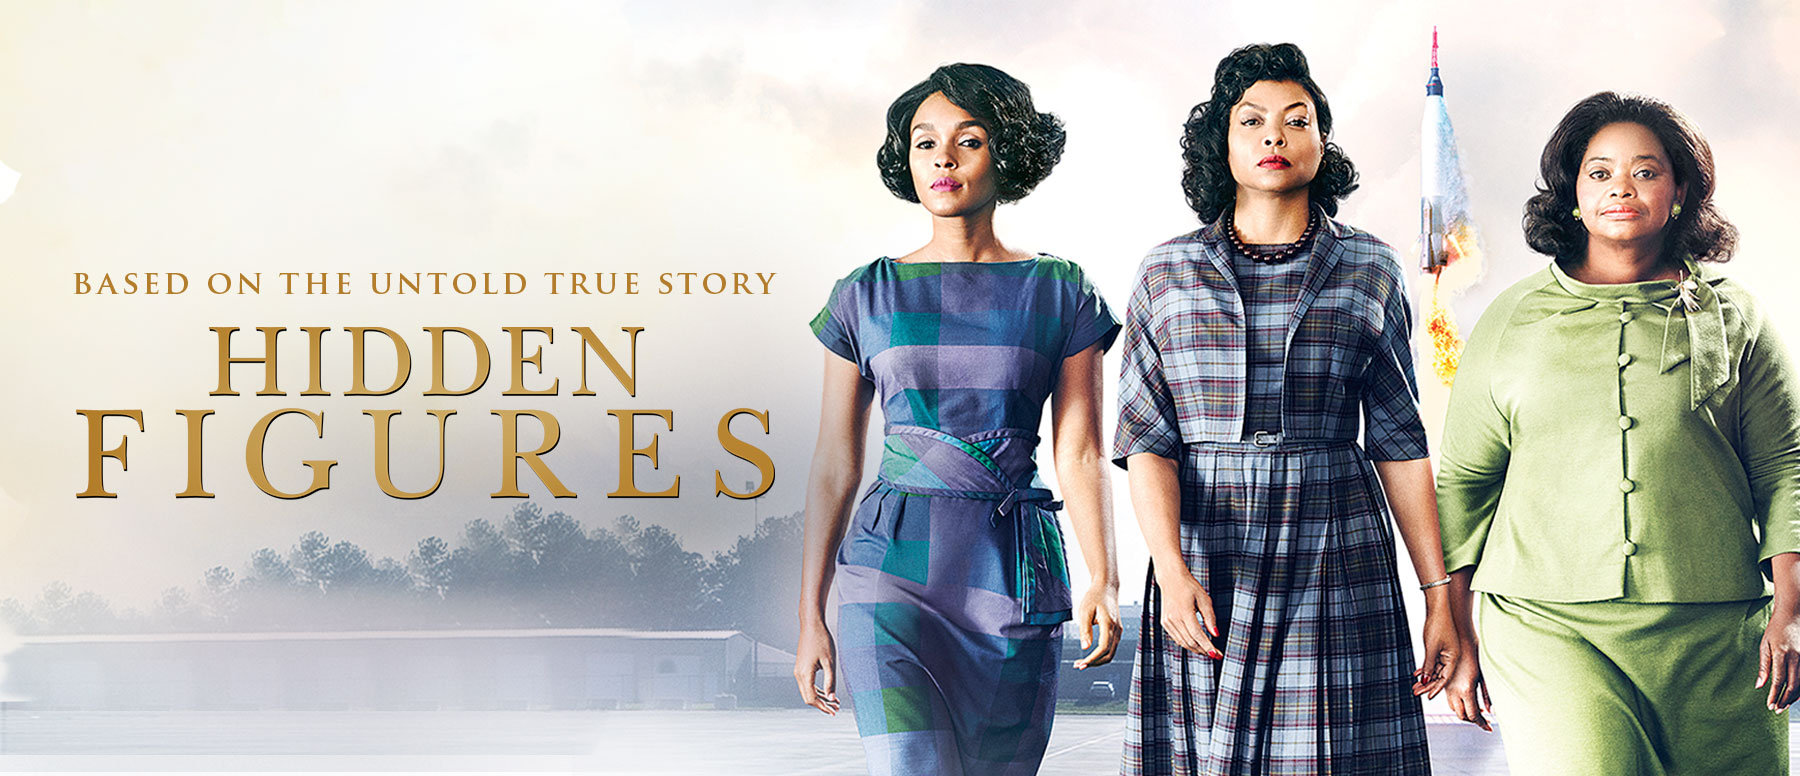 Taraji P. Henson as Katherine Johnson, along with Octavia Spencer and Janelle Monáe as her real-life colleagues Dorothy Vaughan and Mary Jackson star in the 2016 movie 'Hidden Figures'.